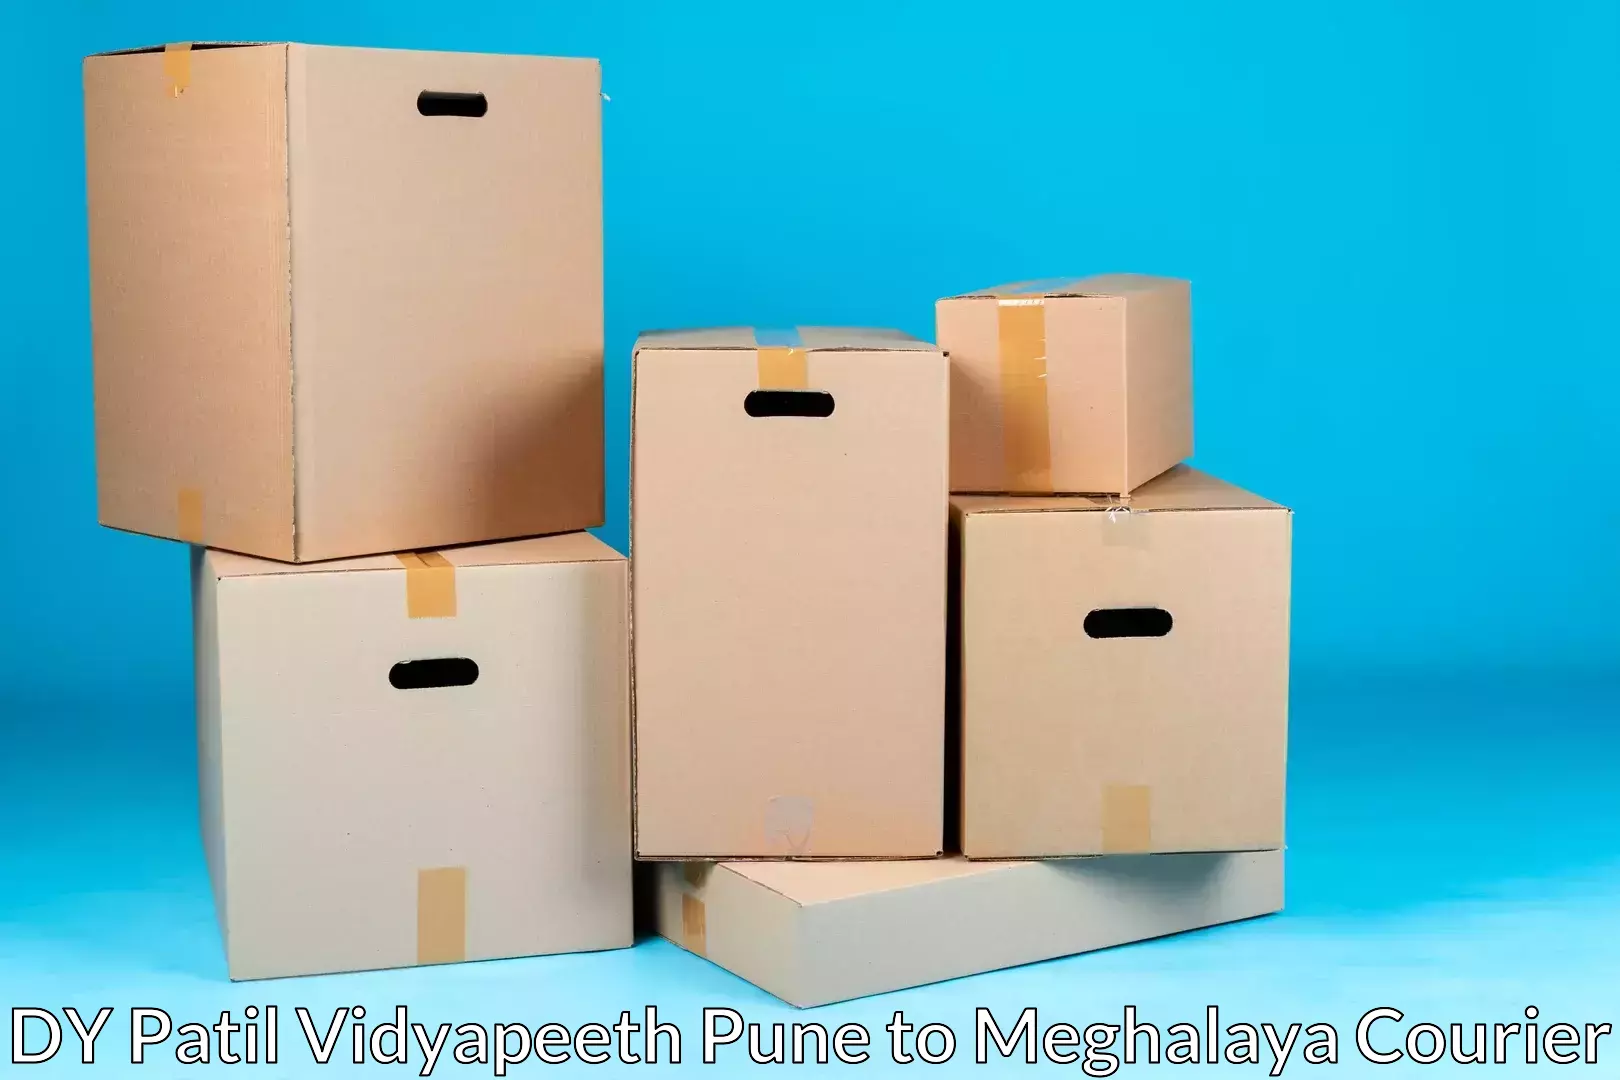 Efficient relocation services DY Patil Vidyapeeth Pune to Meghalaya